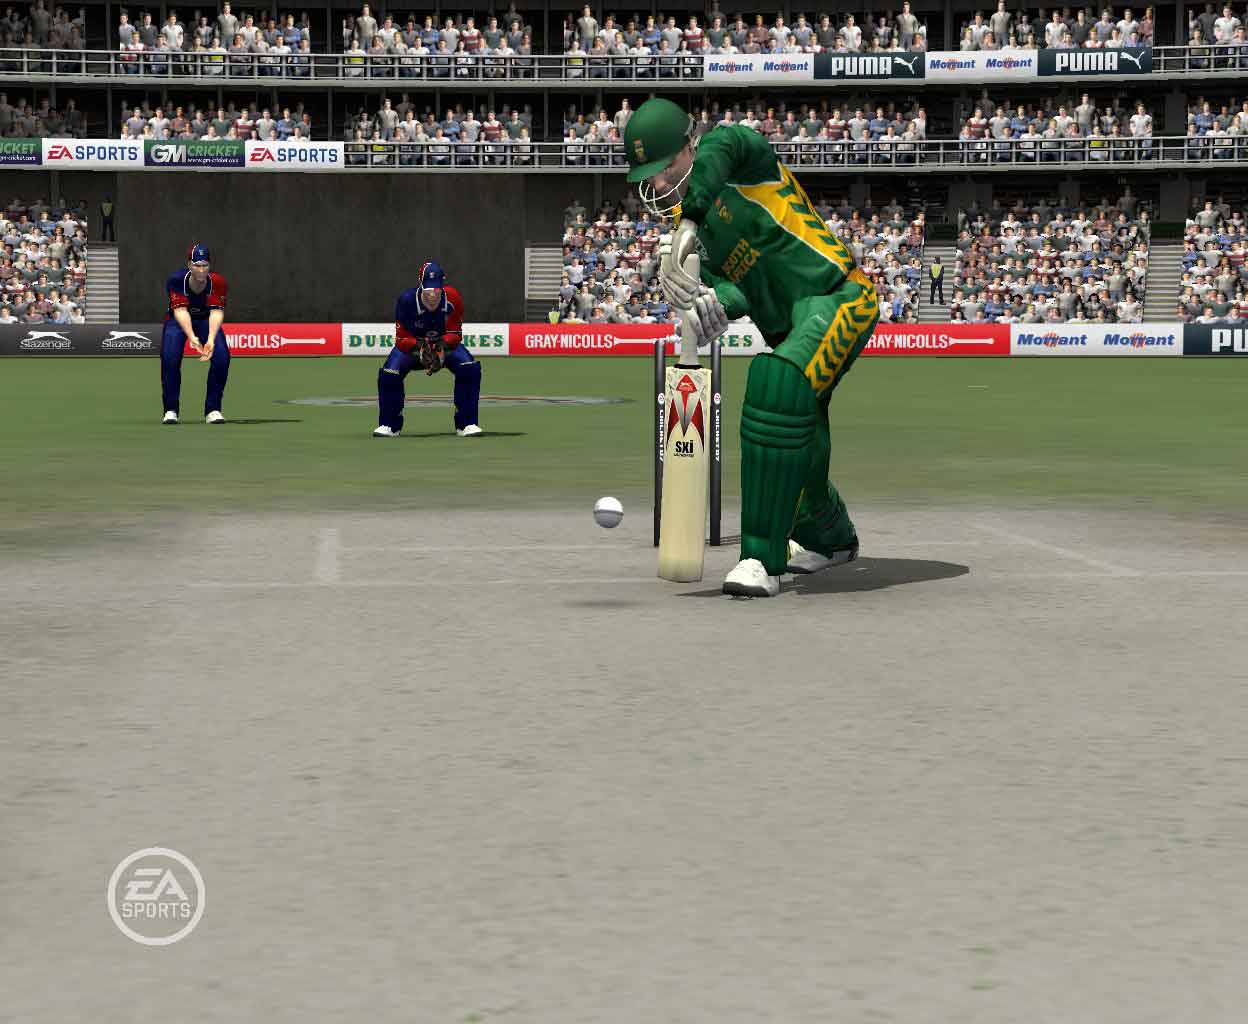 ea sports cricket game download 2007 free download